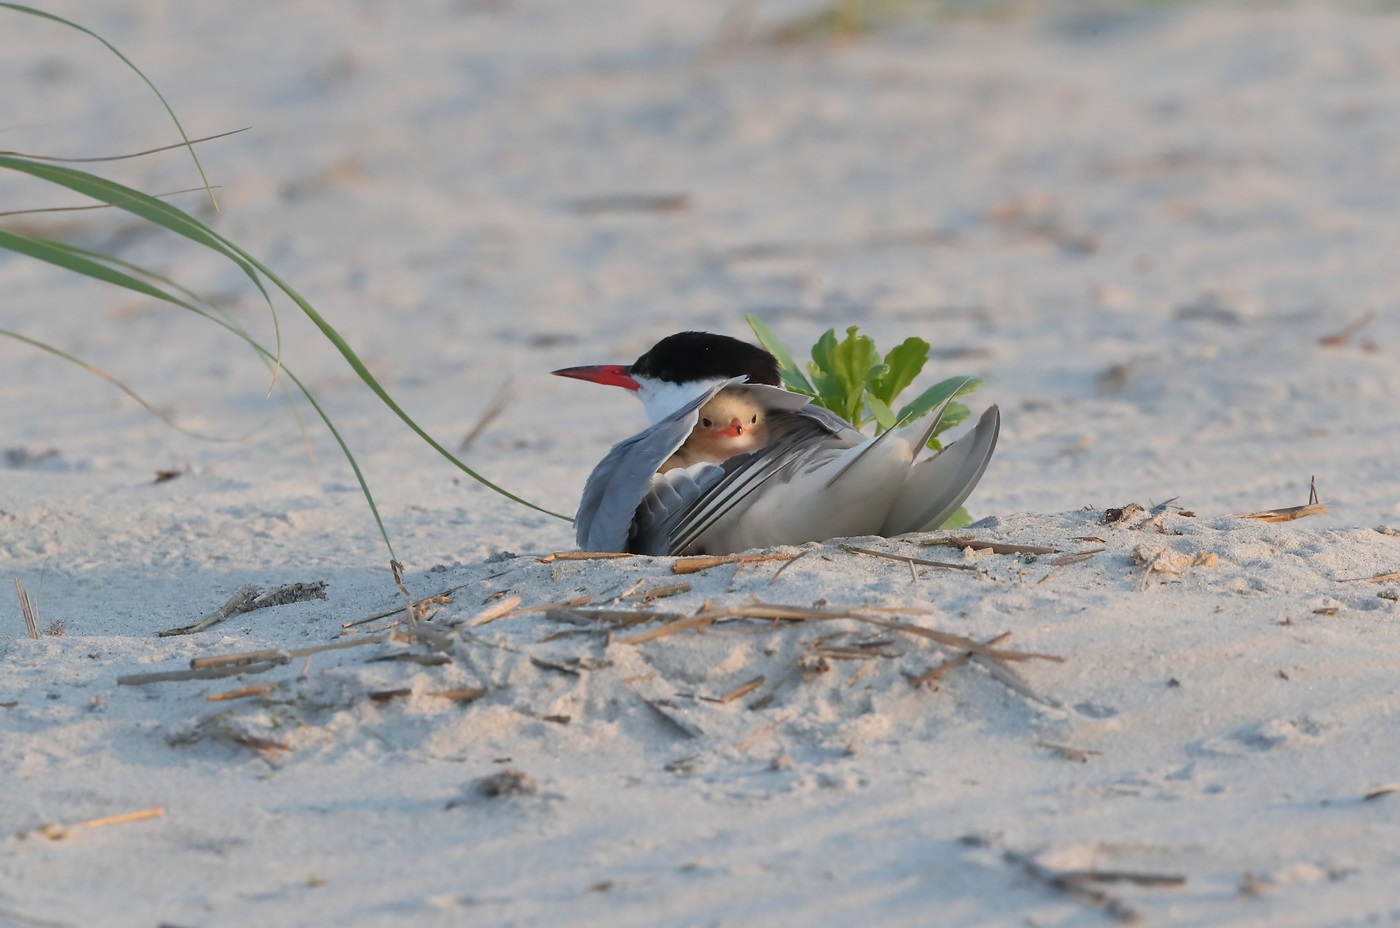 A common tern with a chick on its back, and one egg incubates